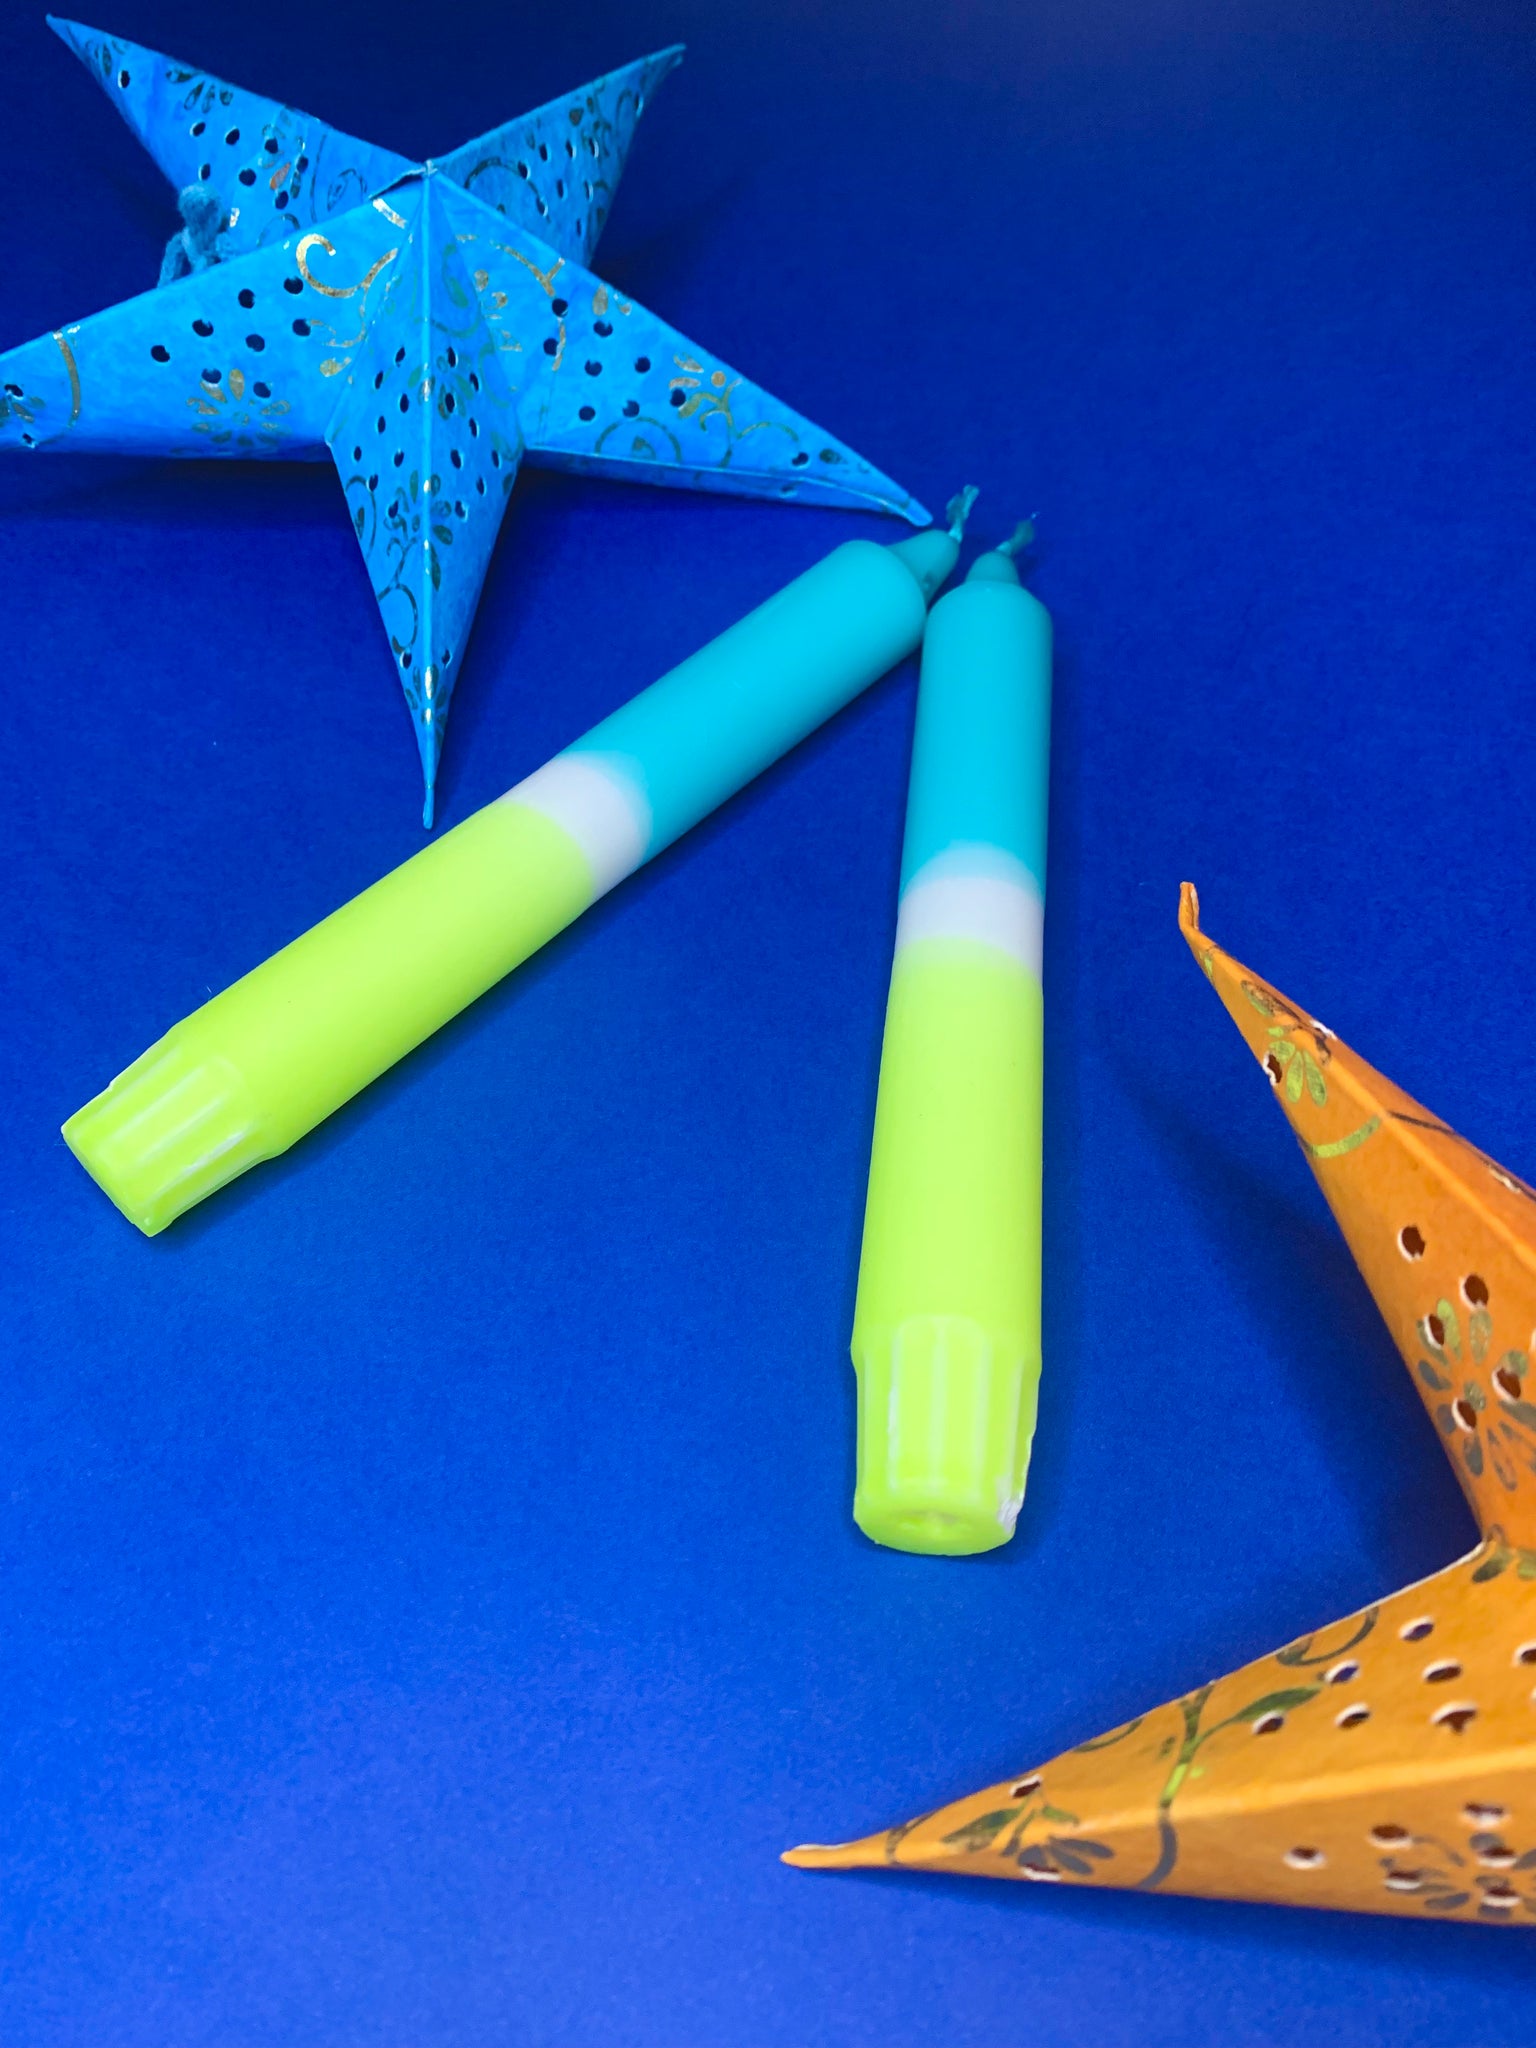 2 Blue and yellow neon candles